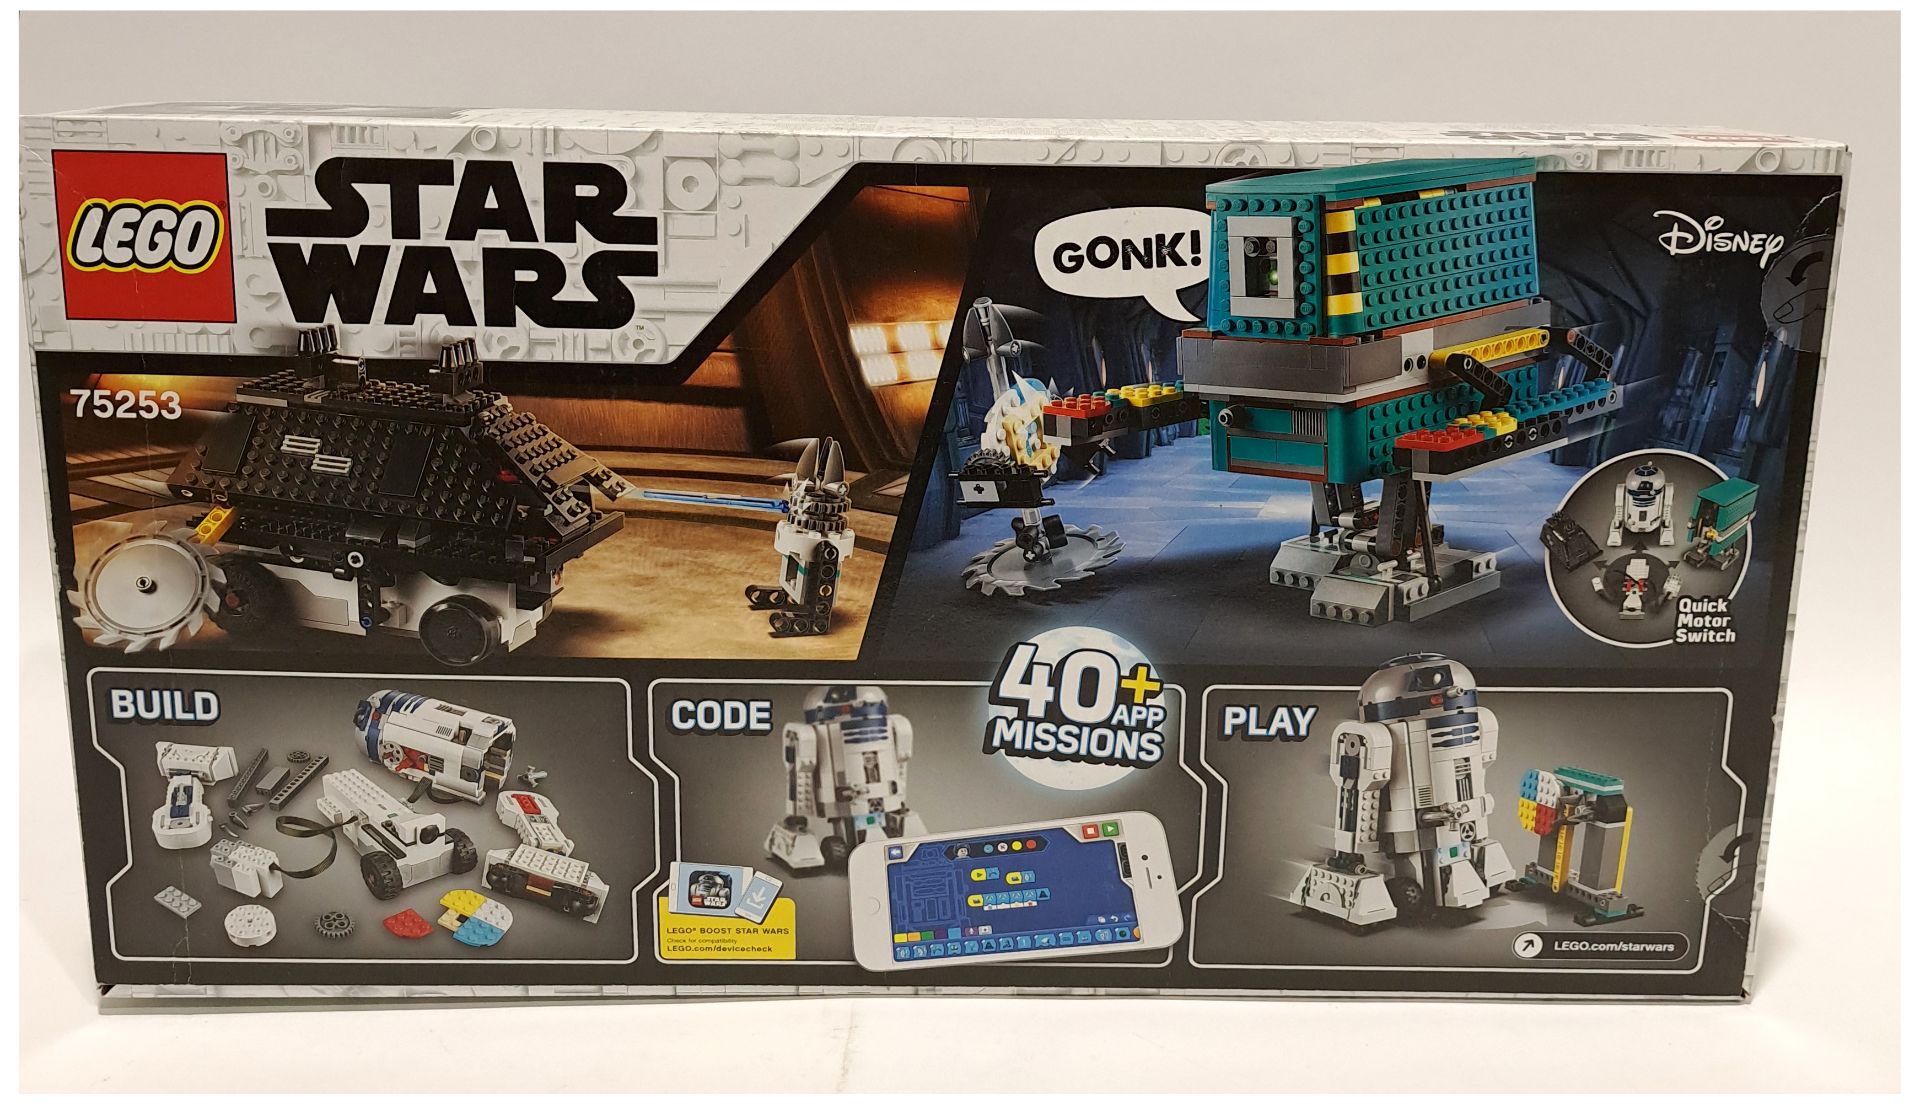 Lego Star Wars Droid Commander #75253 - Image 2 of 2